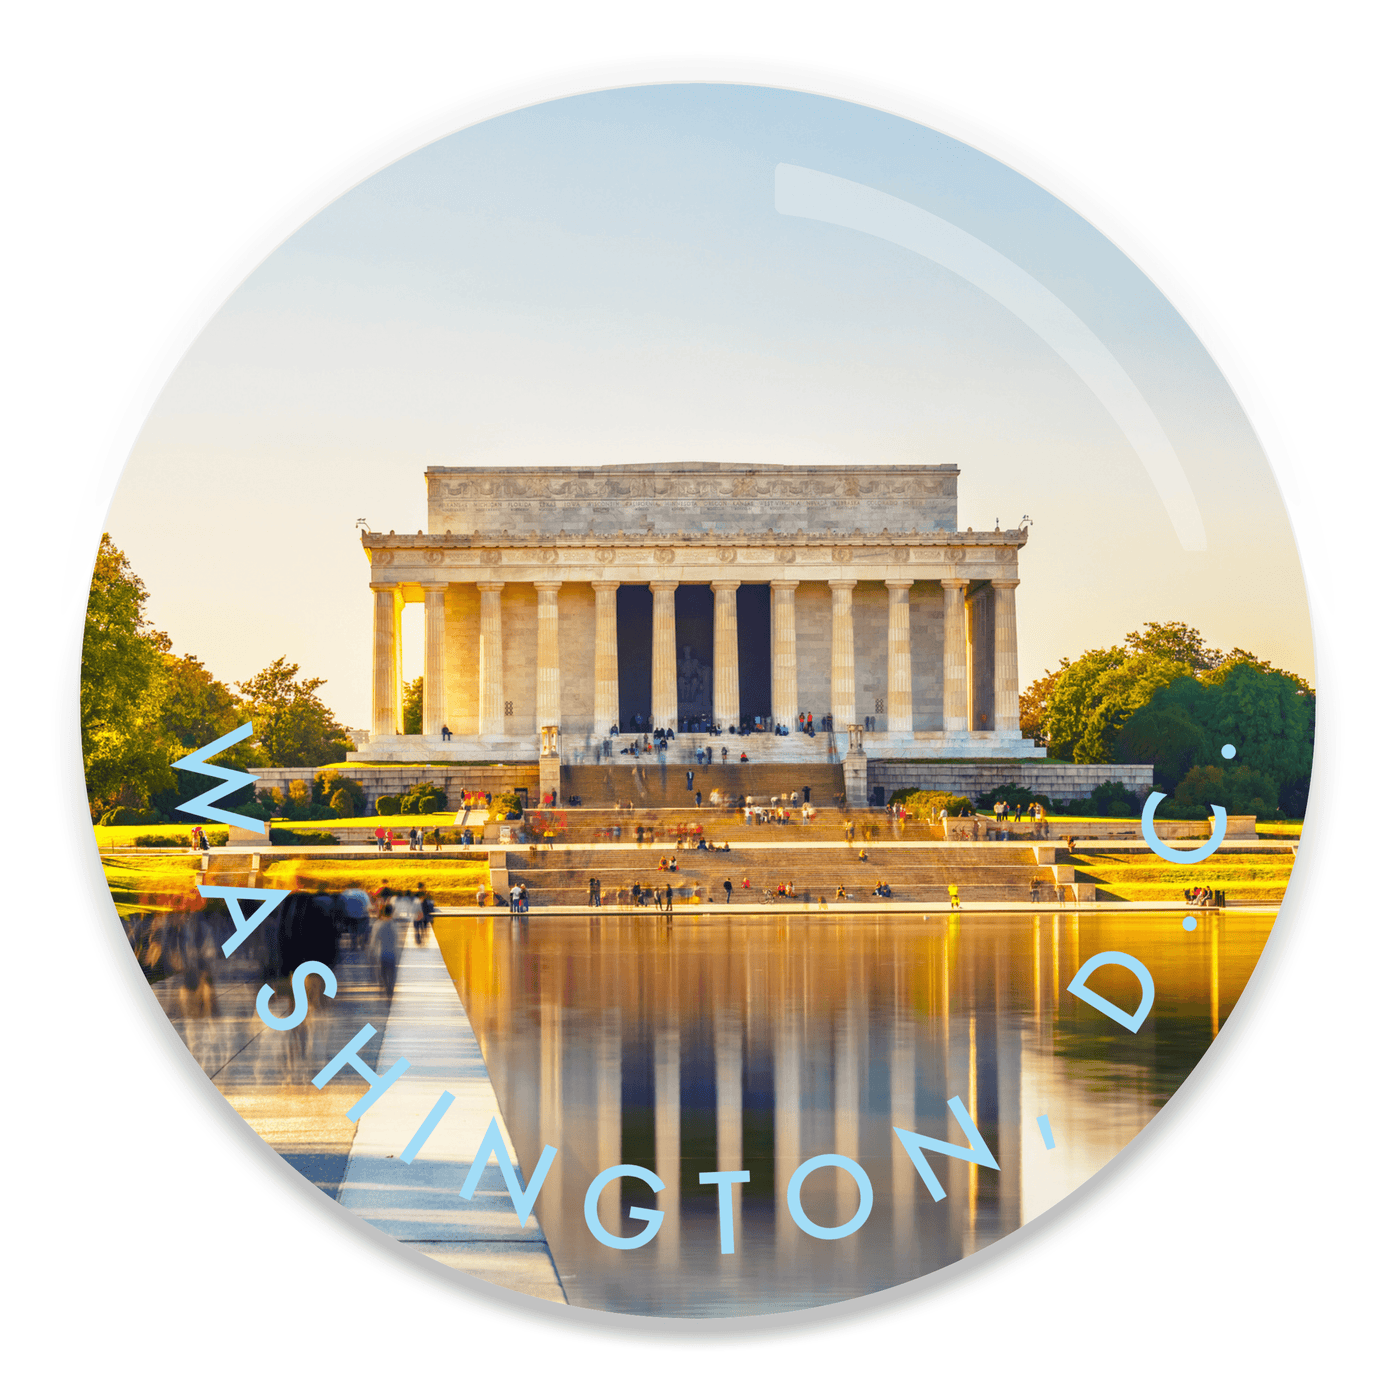 2.25 inch round colorful magnet with image of the Lincoln memorial